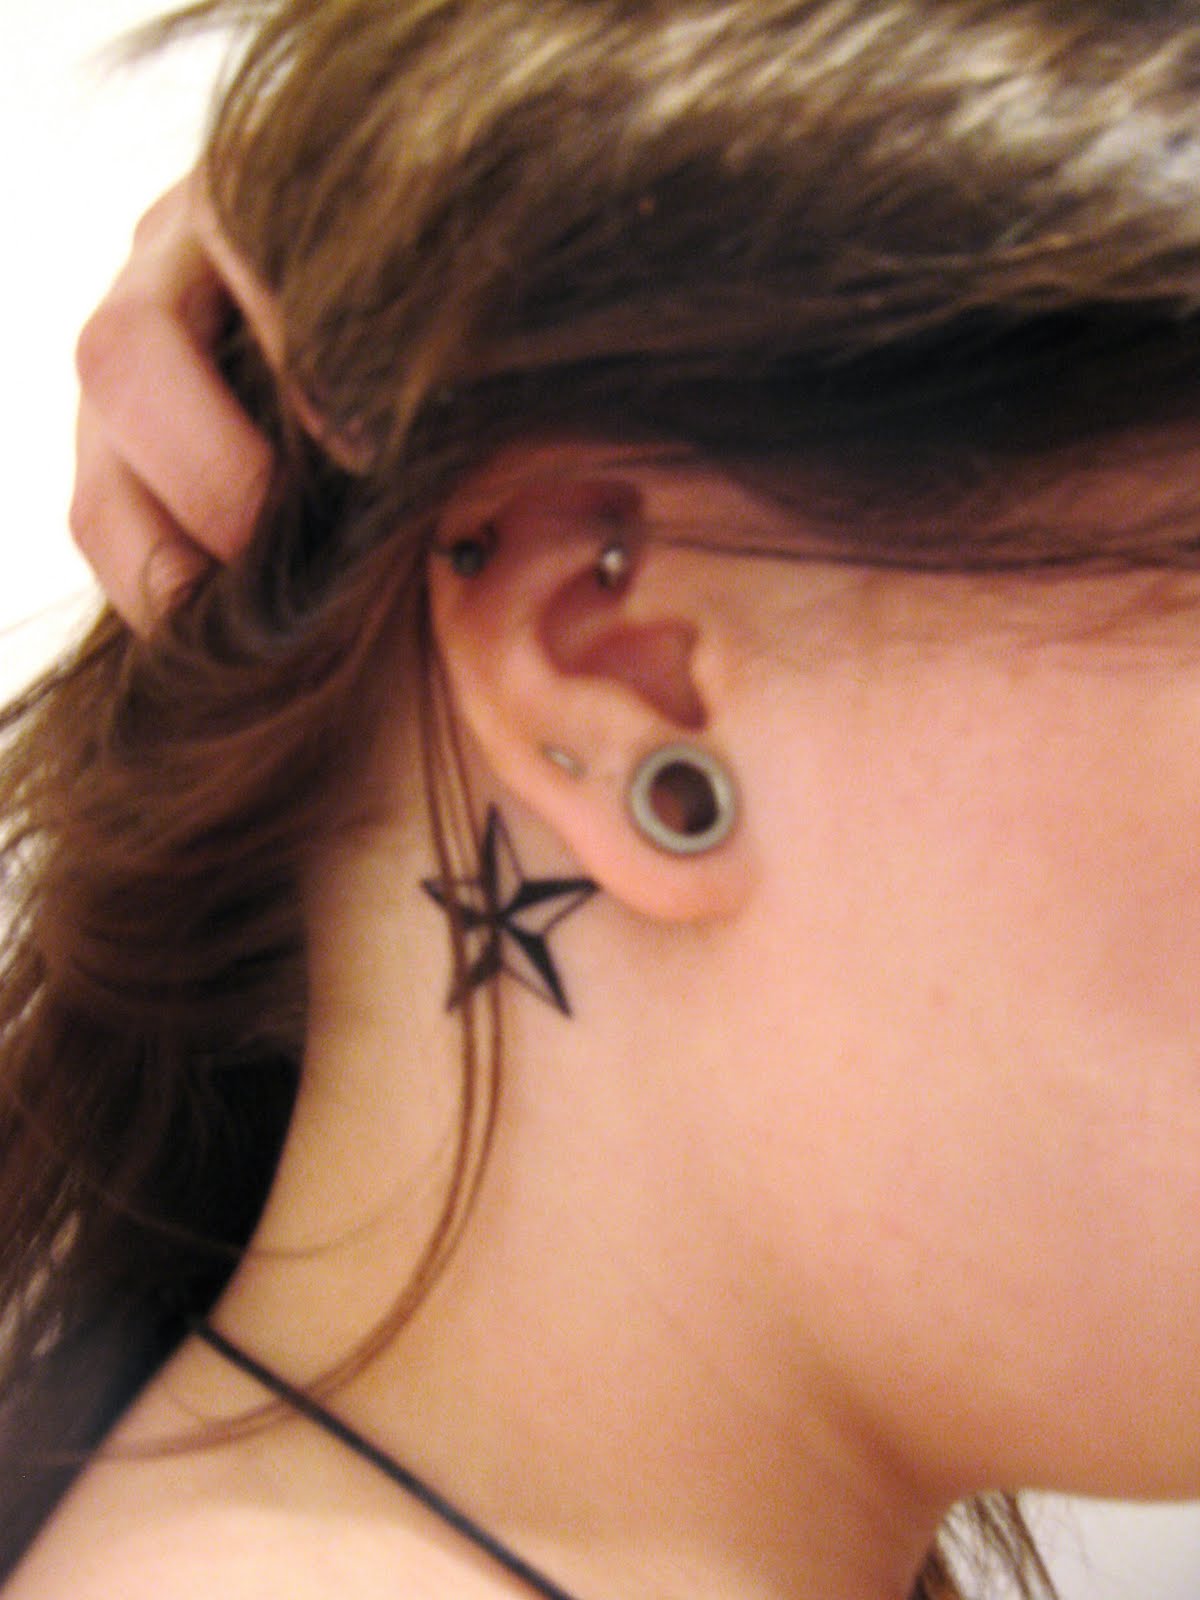 Girl Showing Her Nautical Star Tattoo Behind The Ear